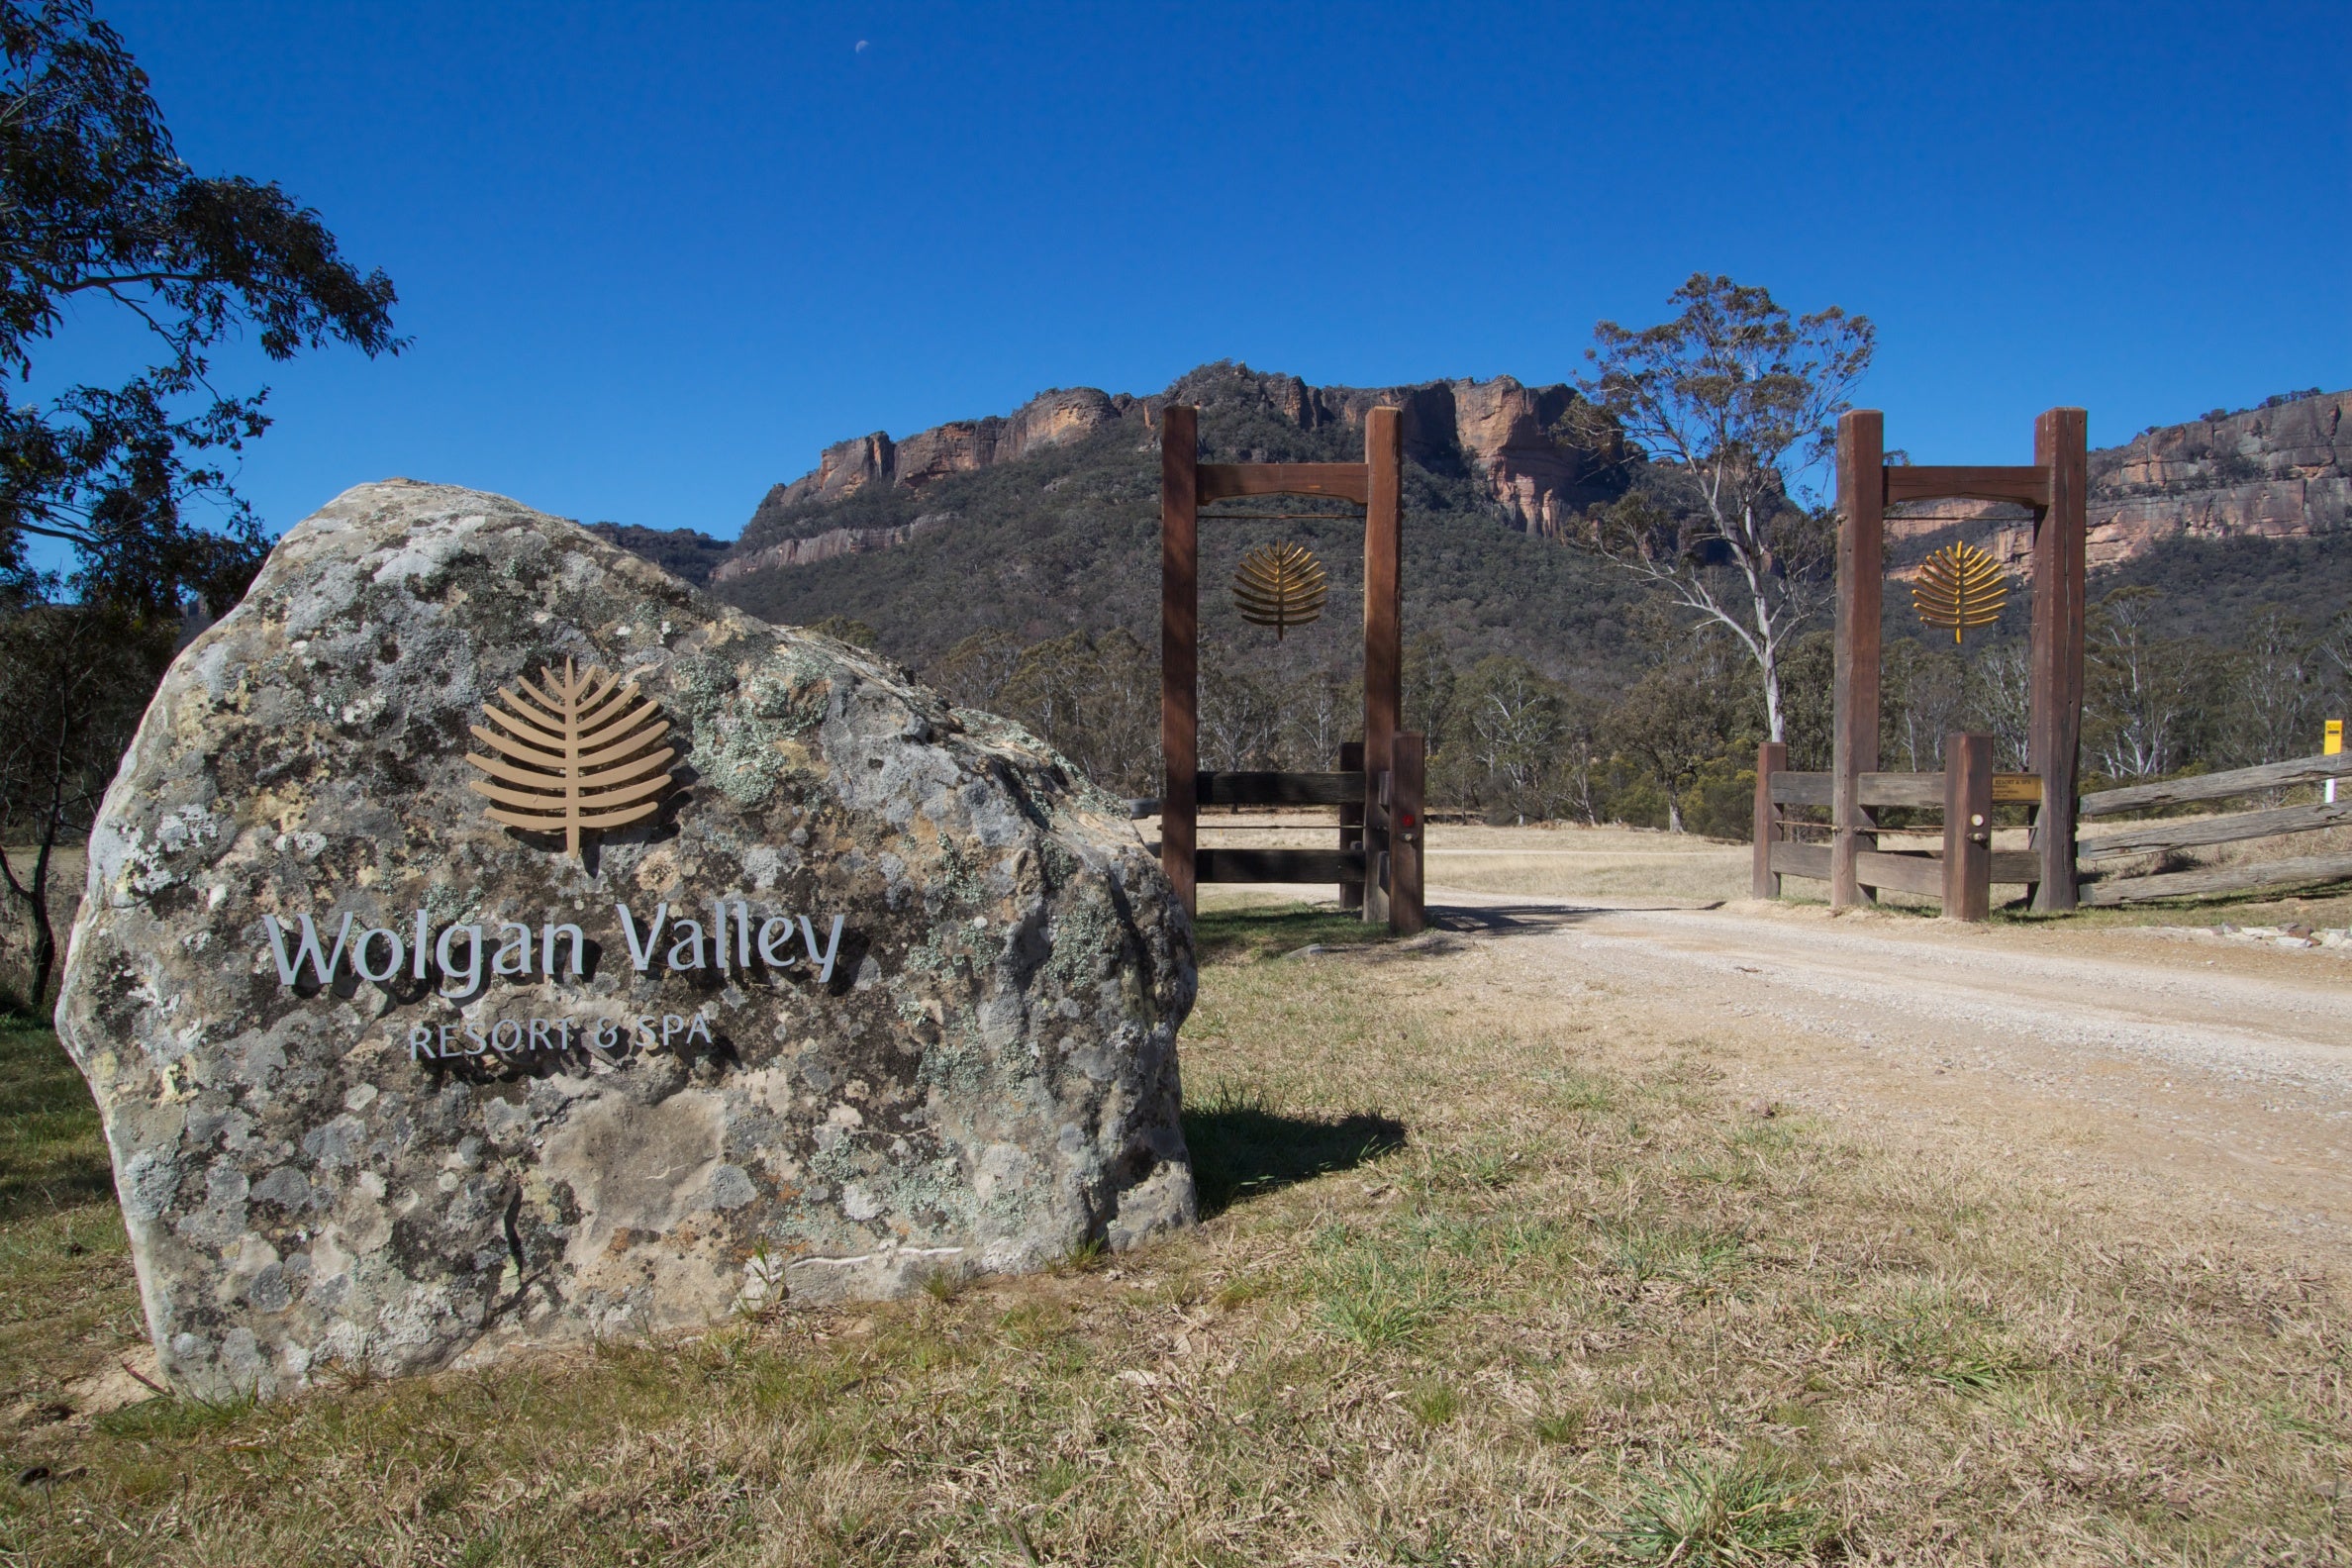 Wolgn_Valley_sign.jpg